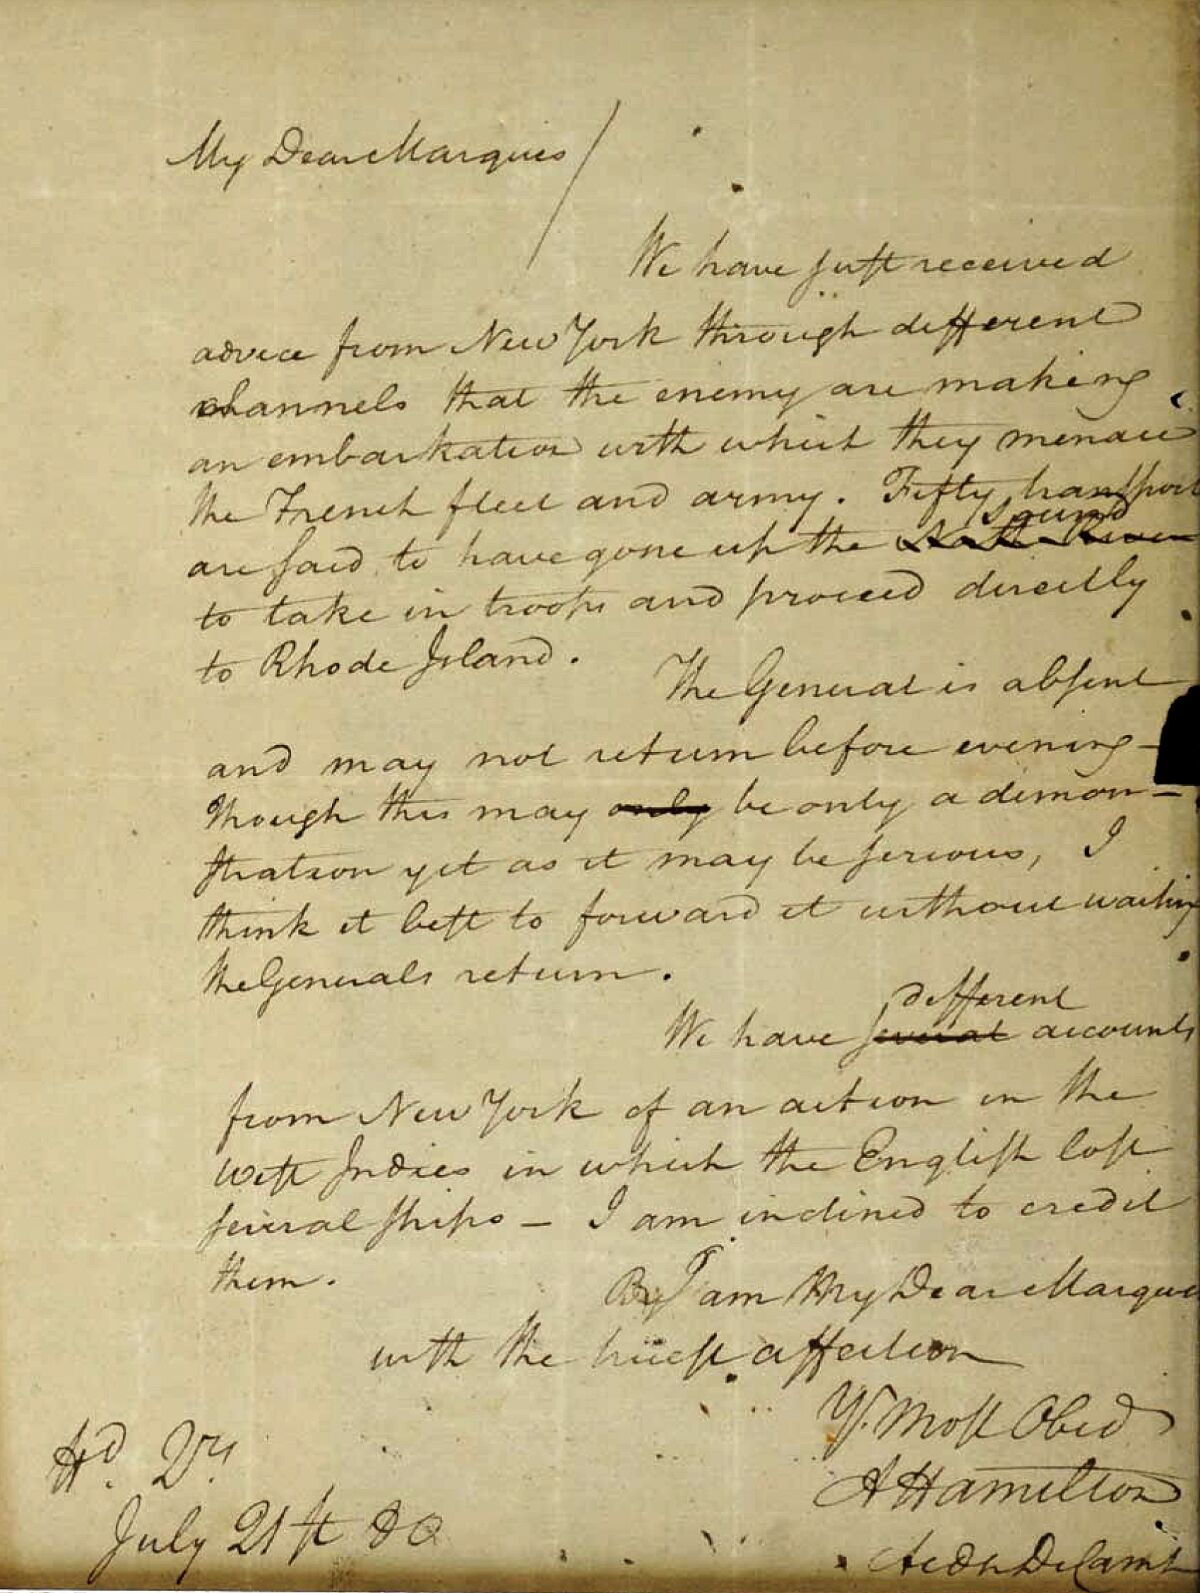 FILE - This image filed May 15, 2019, in federal court as part of a forfeiture complaint by the U.S. attorney's office in Boston shows a 1780 letter from Alexander Hamilton to the Marquis de Lafayette, that was stolen from the Massachusetts Archives decades ago. The letter written by Hamilton during the Revolutionary War and believed stolen decades ago from the Massachusetts state archives was returned Tuesday, Oct. 12, 2021, following a federal appeals court decision. (U.S. Attorney's Office via AP)